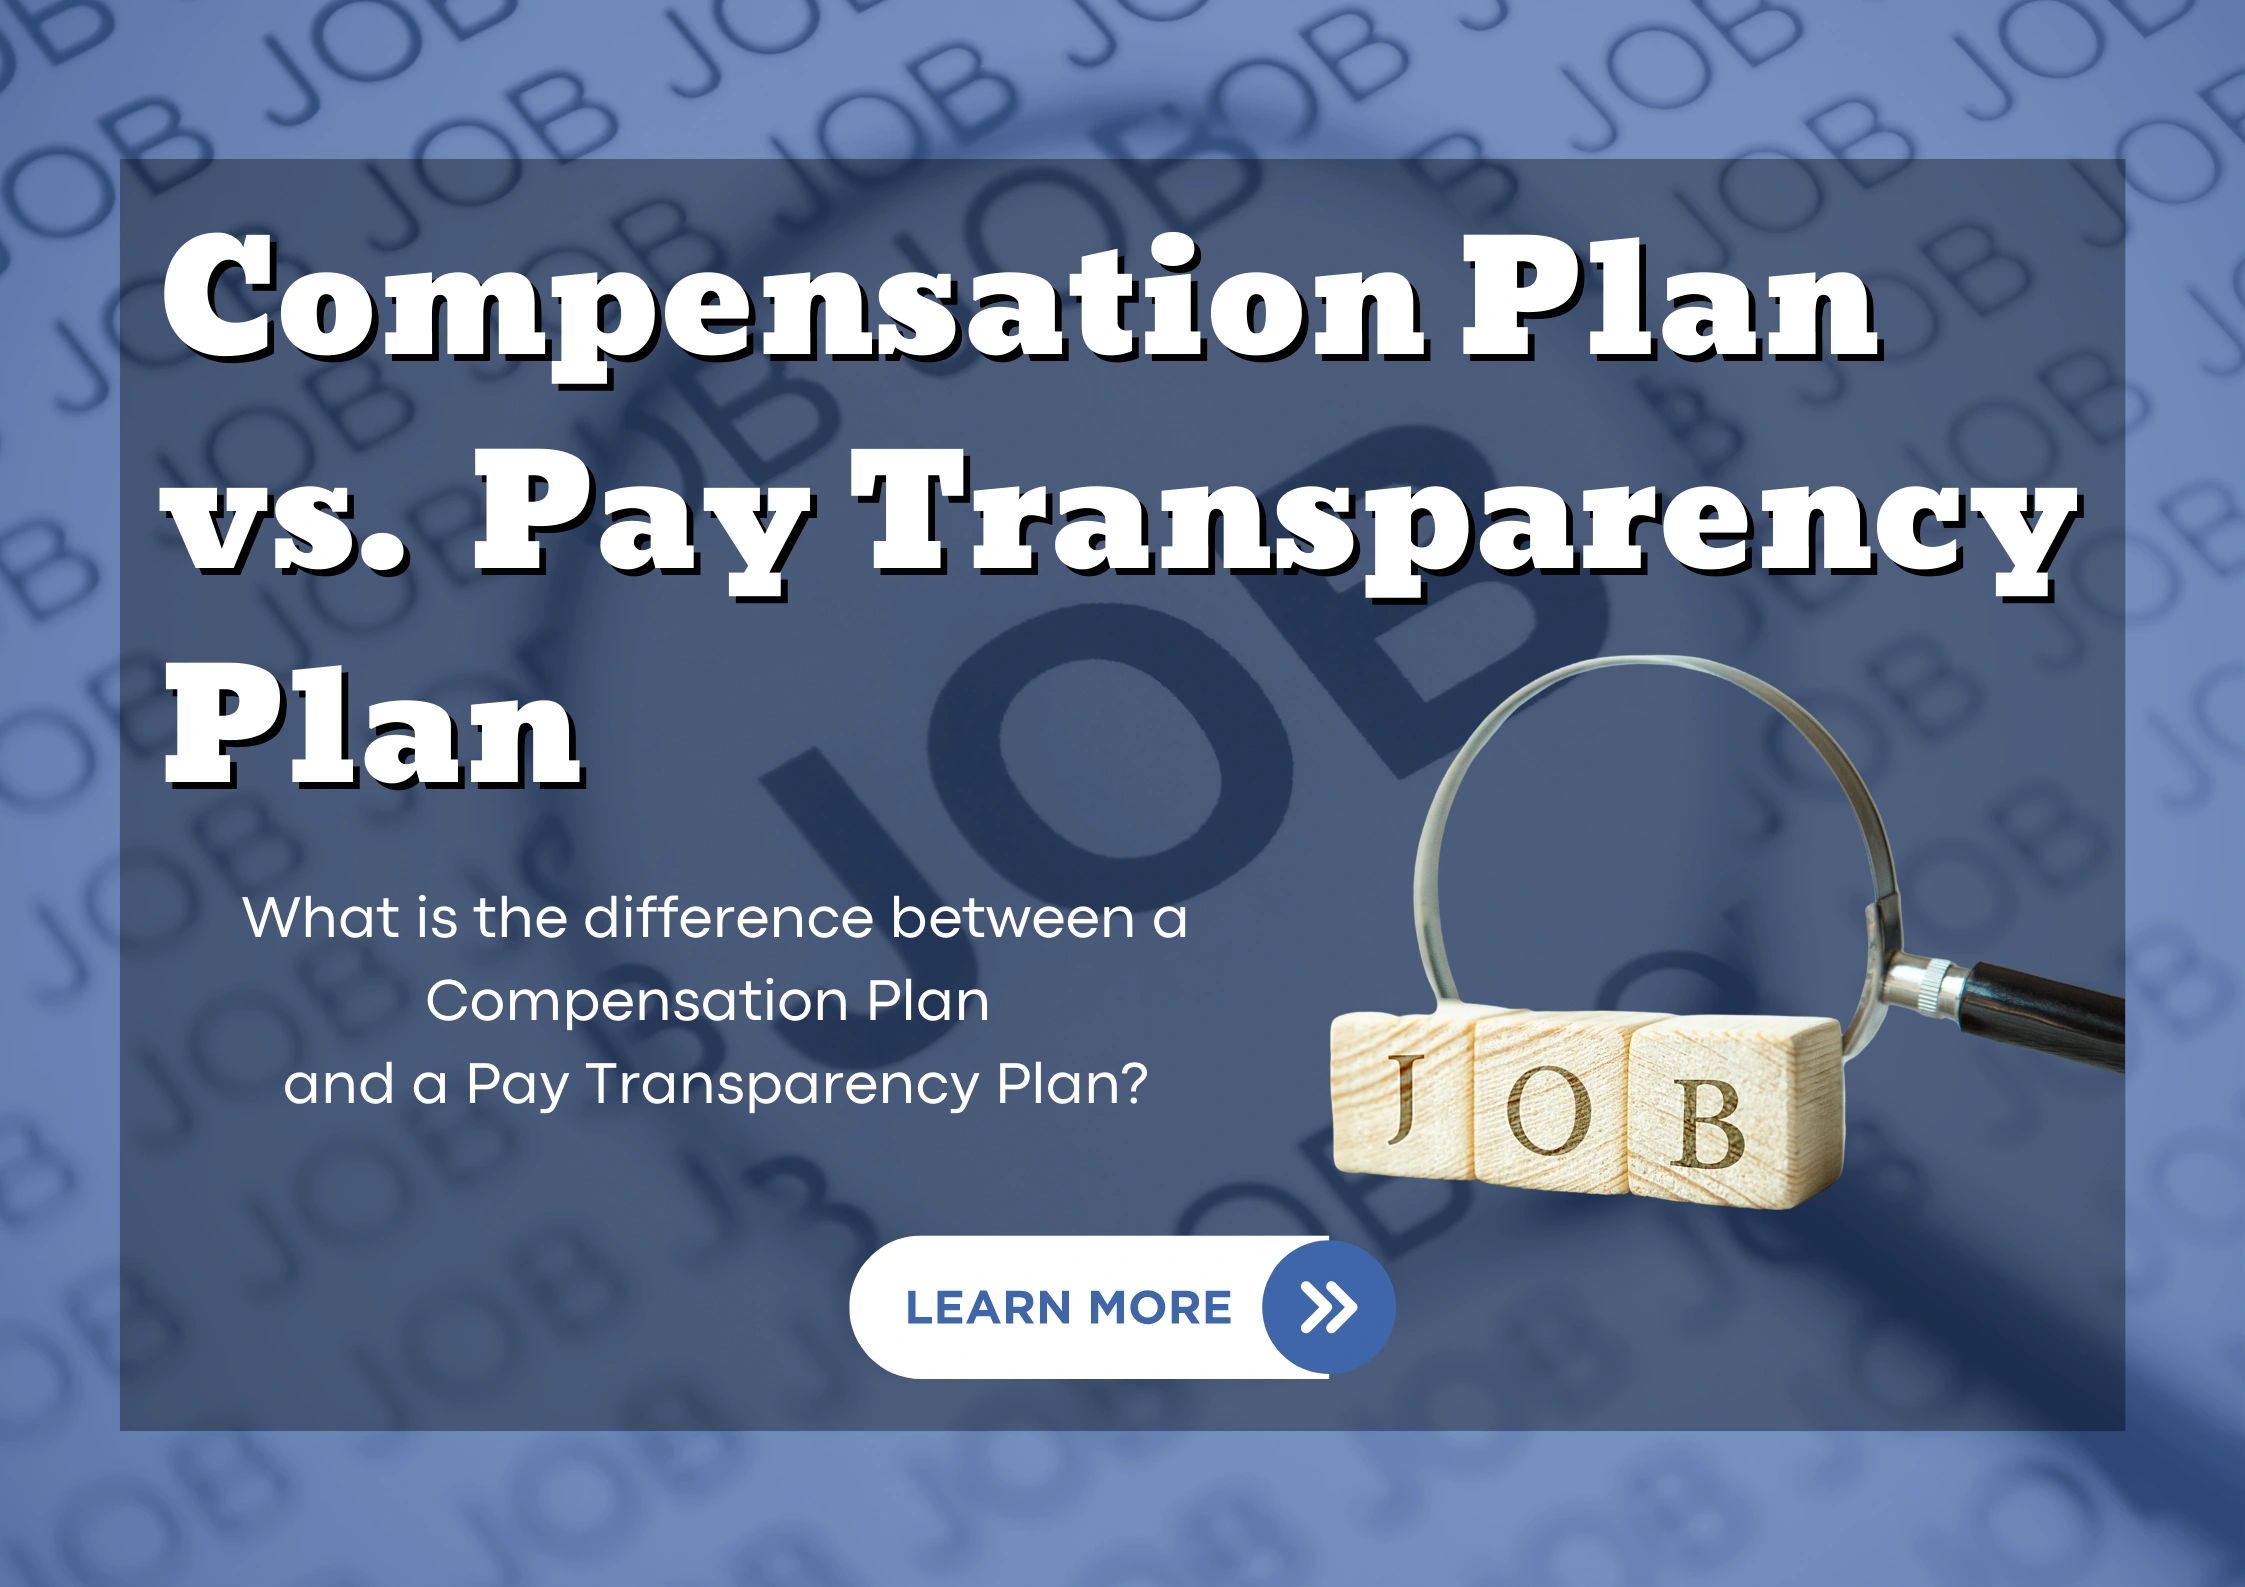 7 Things To Look For in a Compensation Package